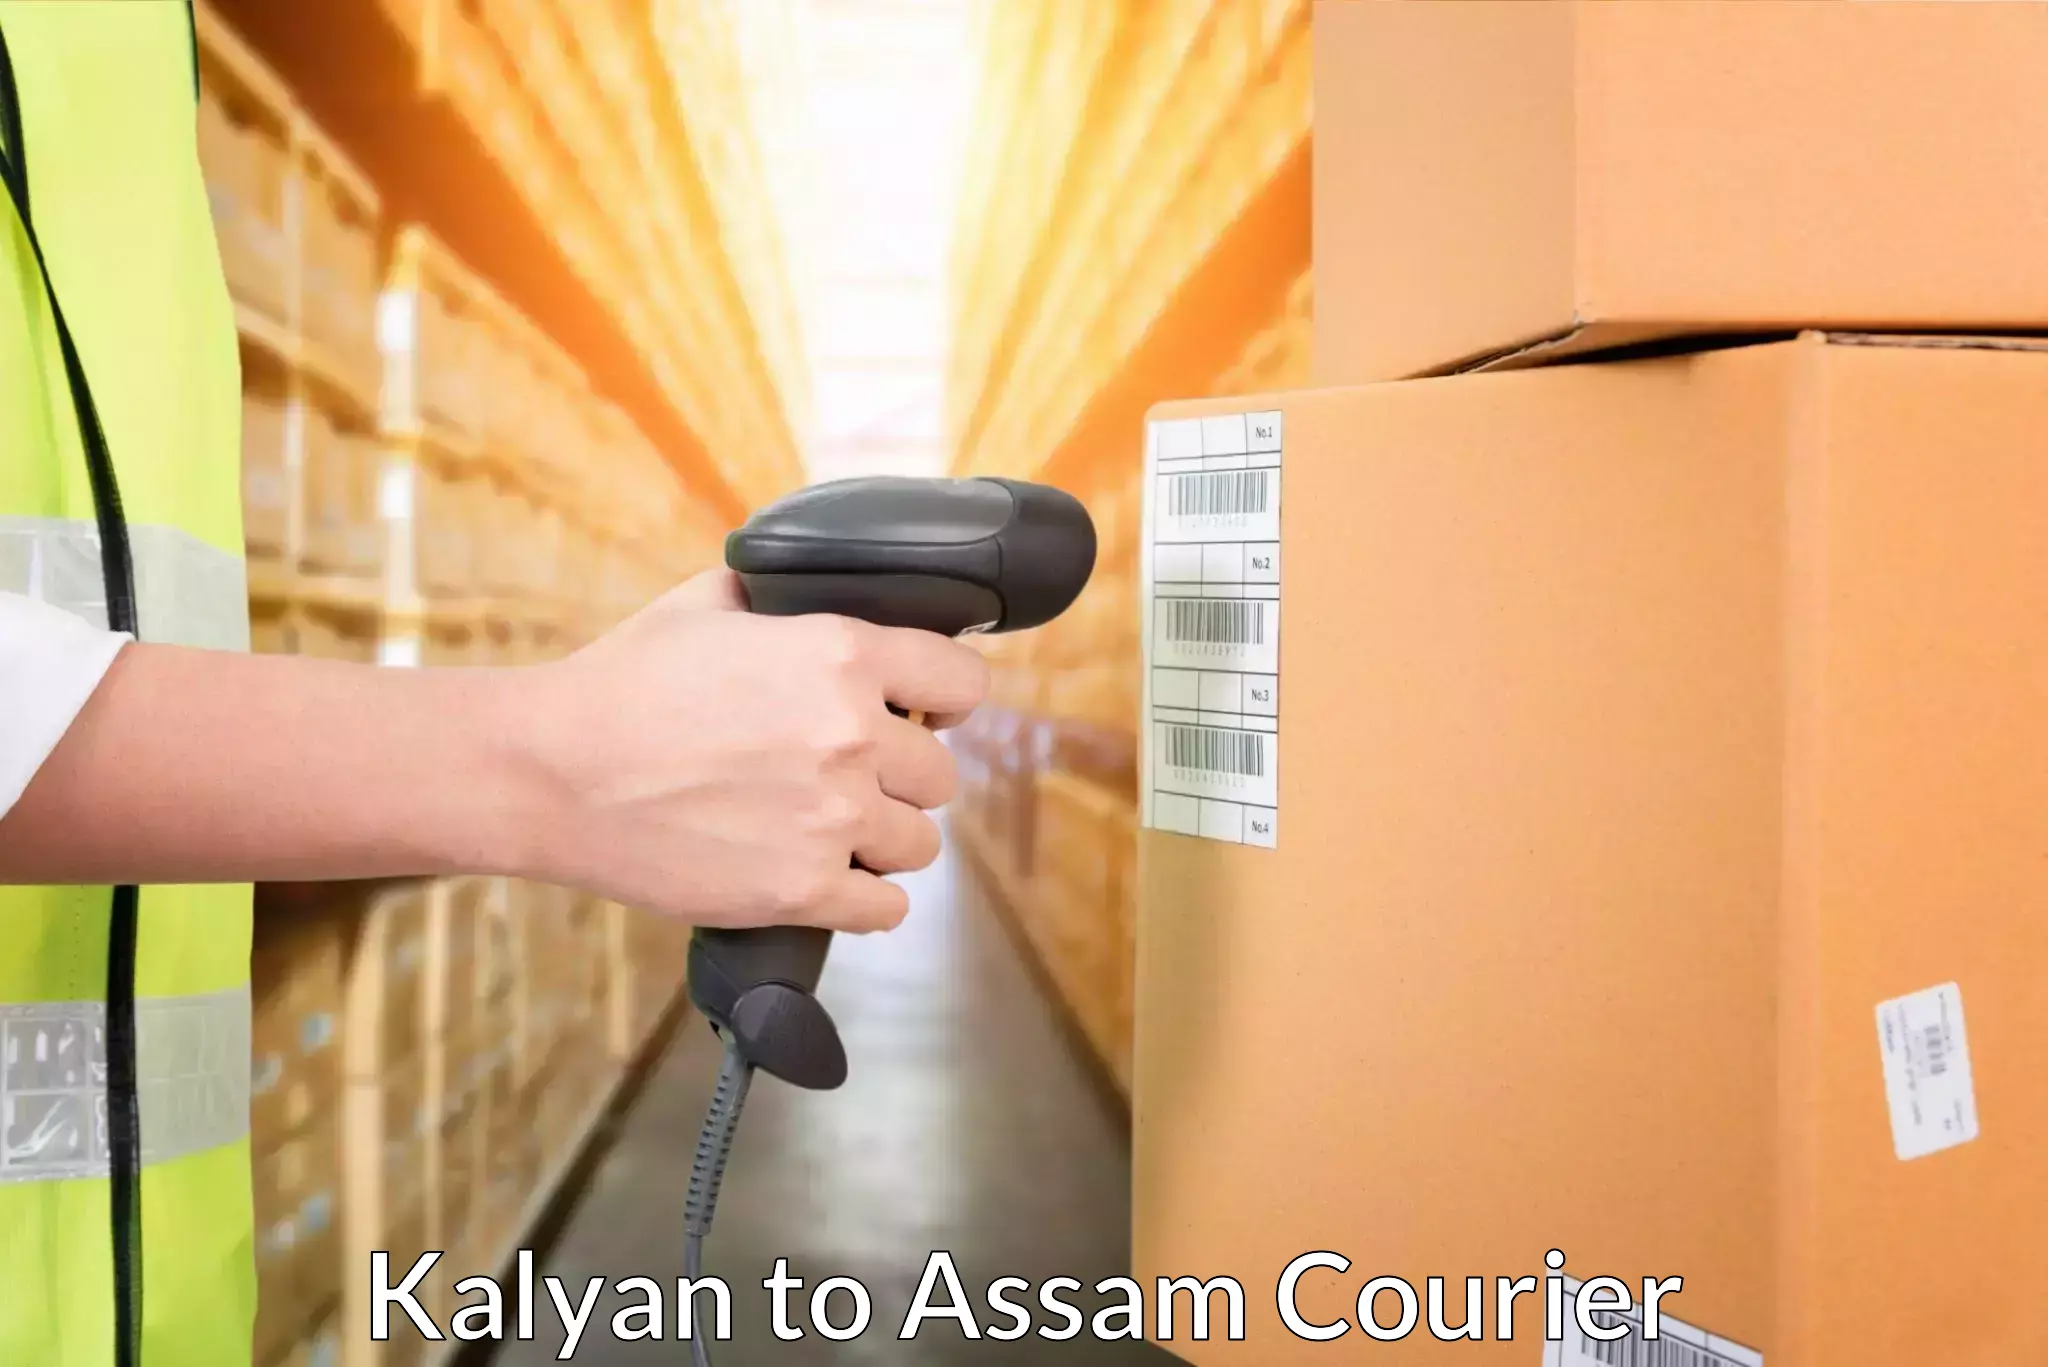 State-of-the-art courier technology Kalyan to Digboi